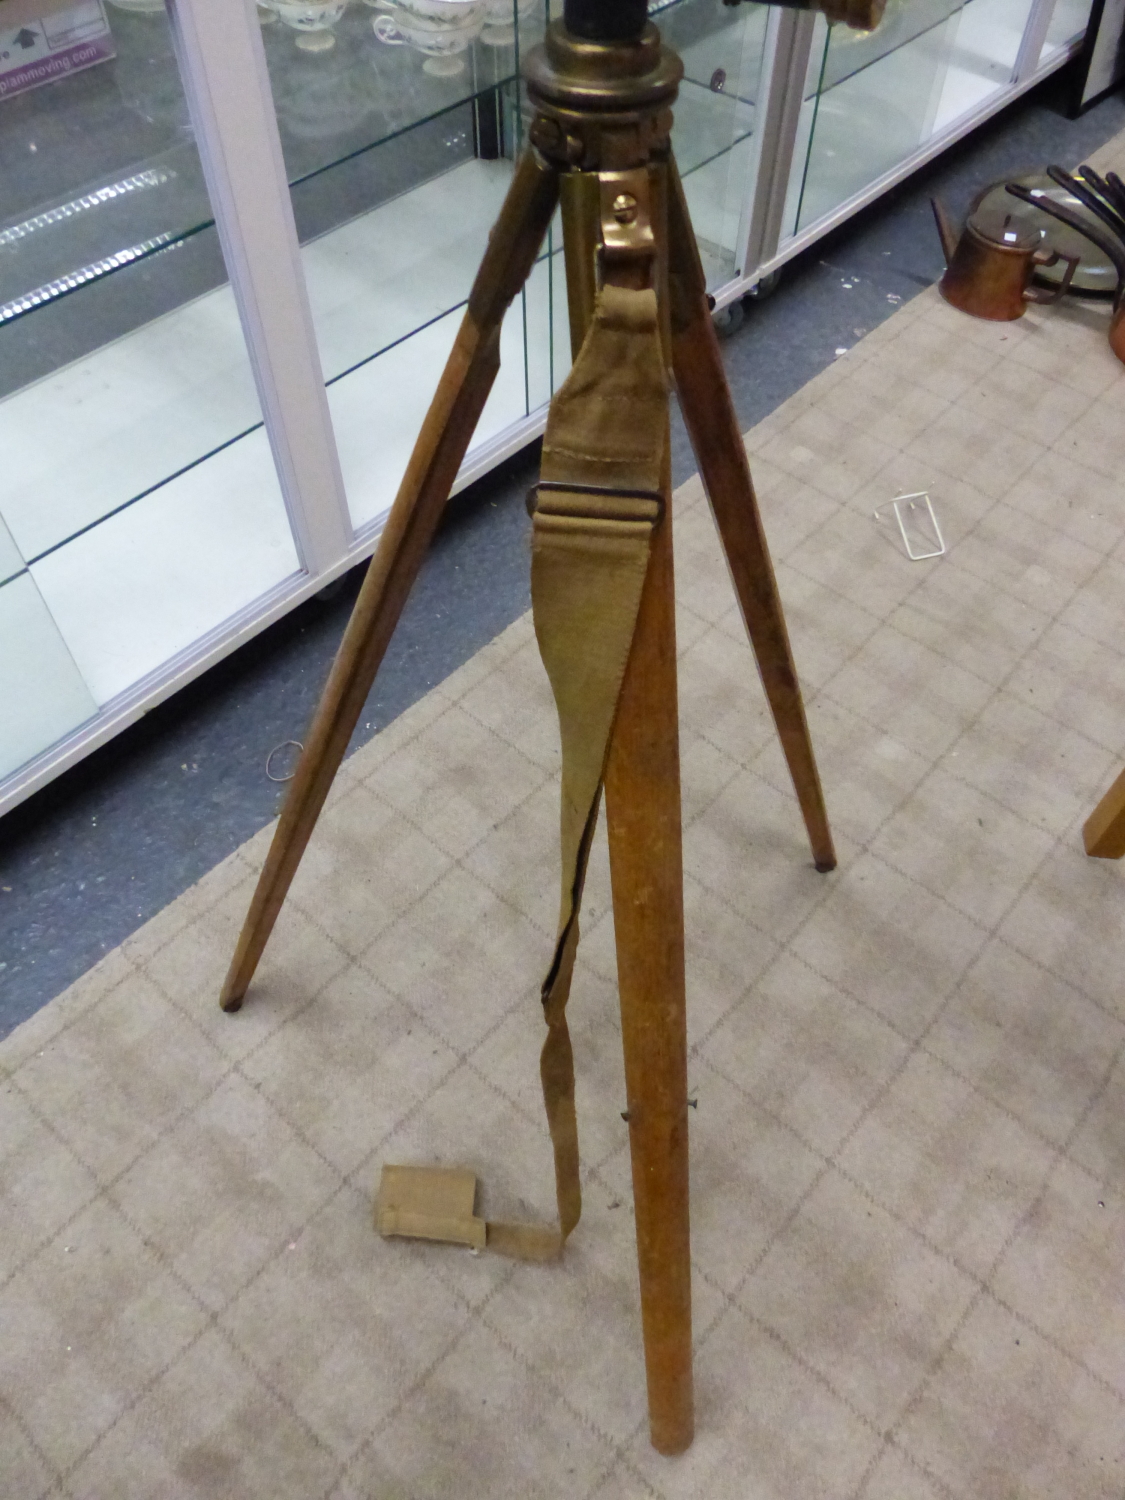 A 1944 SIGHT DIAL No. 9 MK 1 ON TRIPOD WITH CANVAS SHOULDER STRAP. H 125cms. - Image 7 of 11